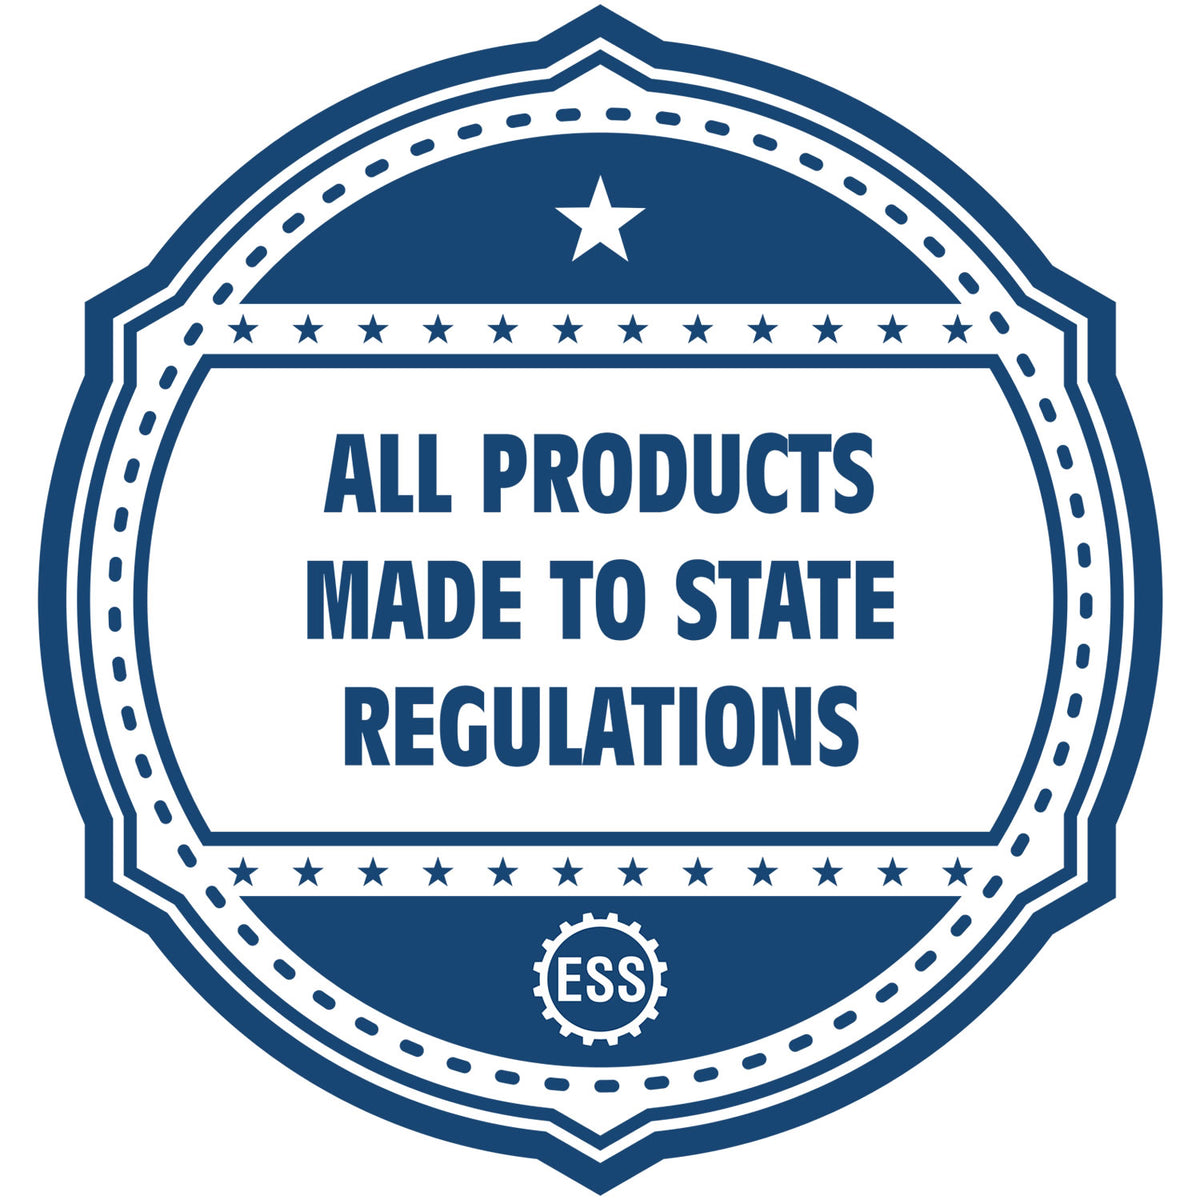 A blue icon or badge for the Gift Idaho Landscape Architect Seal showing that this product is made in compliance with state regulations.